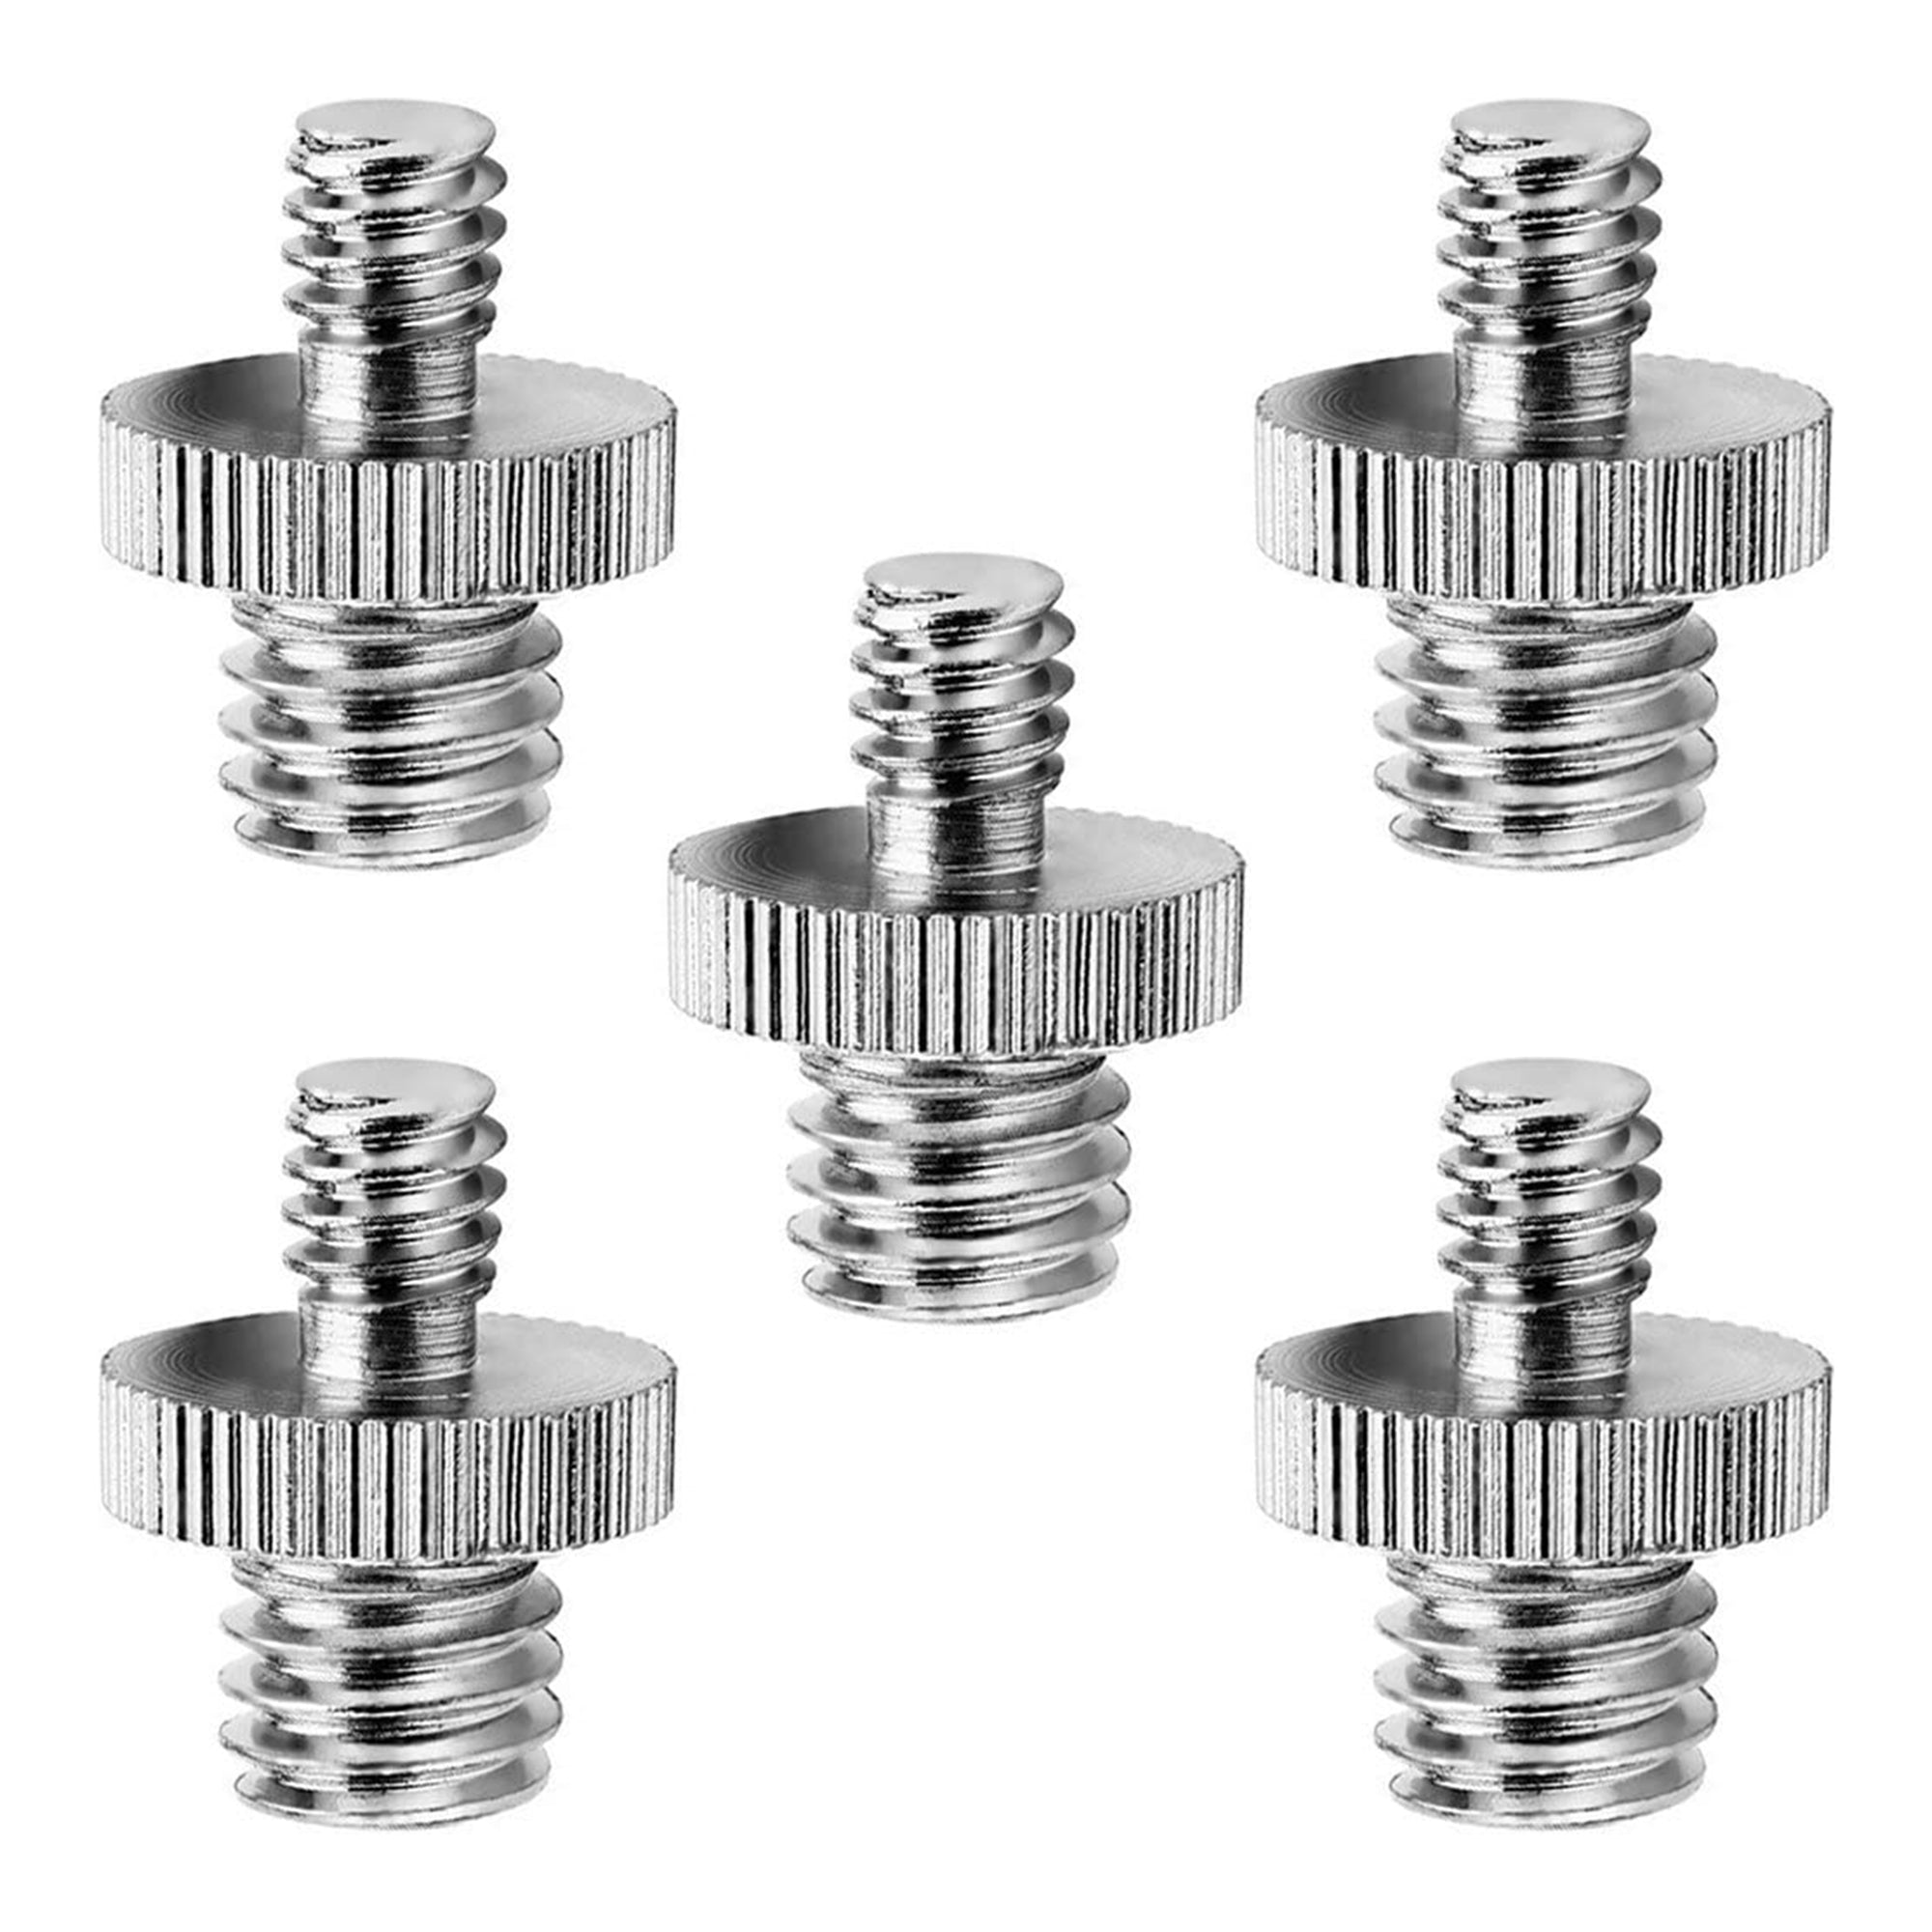 5 Core 3/8 to 1/4 adapter Tripod Screw Adapter 5 Pieces Double Sides Standard Mounting Thread Converter for Camera Mount -1/4M-3/8M Camera Screw 5Pcs